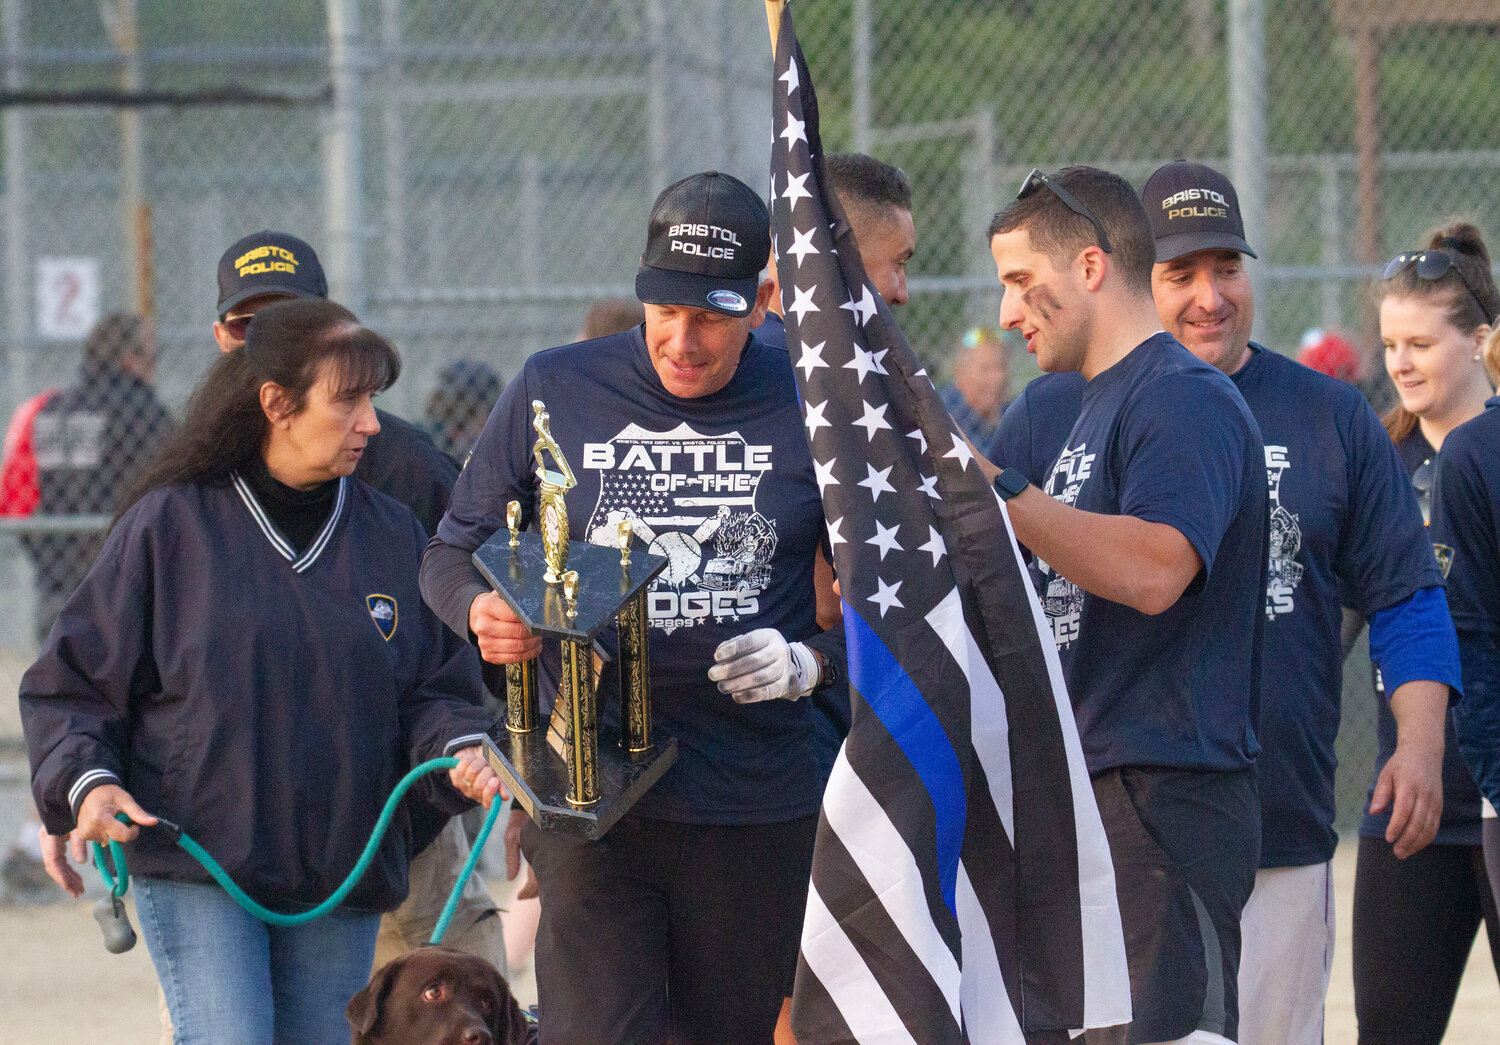 Chief Kevin Lynch is award the new trophy after the Police won 11-10 in extra innings to win the first annual B battle of the Badges softball game.